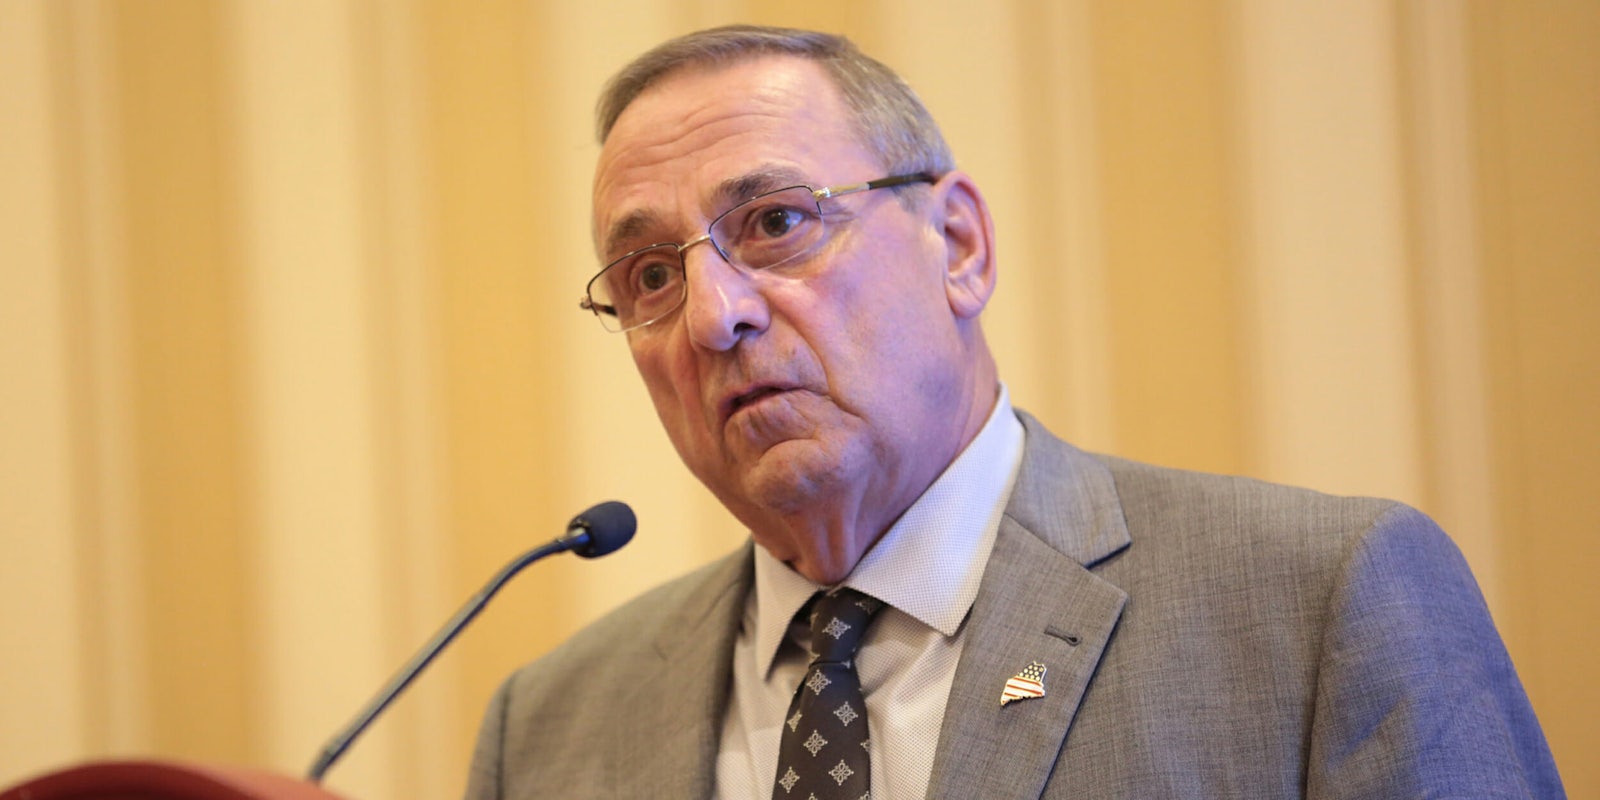 The ACLU in Maine is suing Gov. Paul LePage